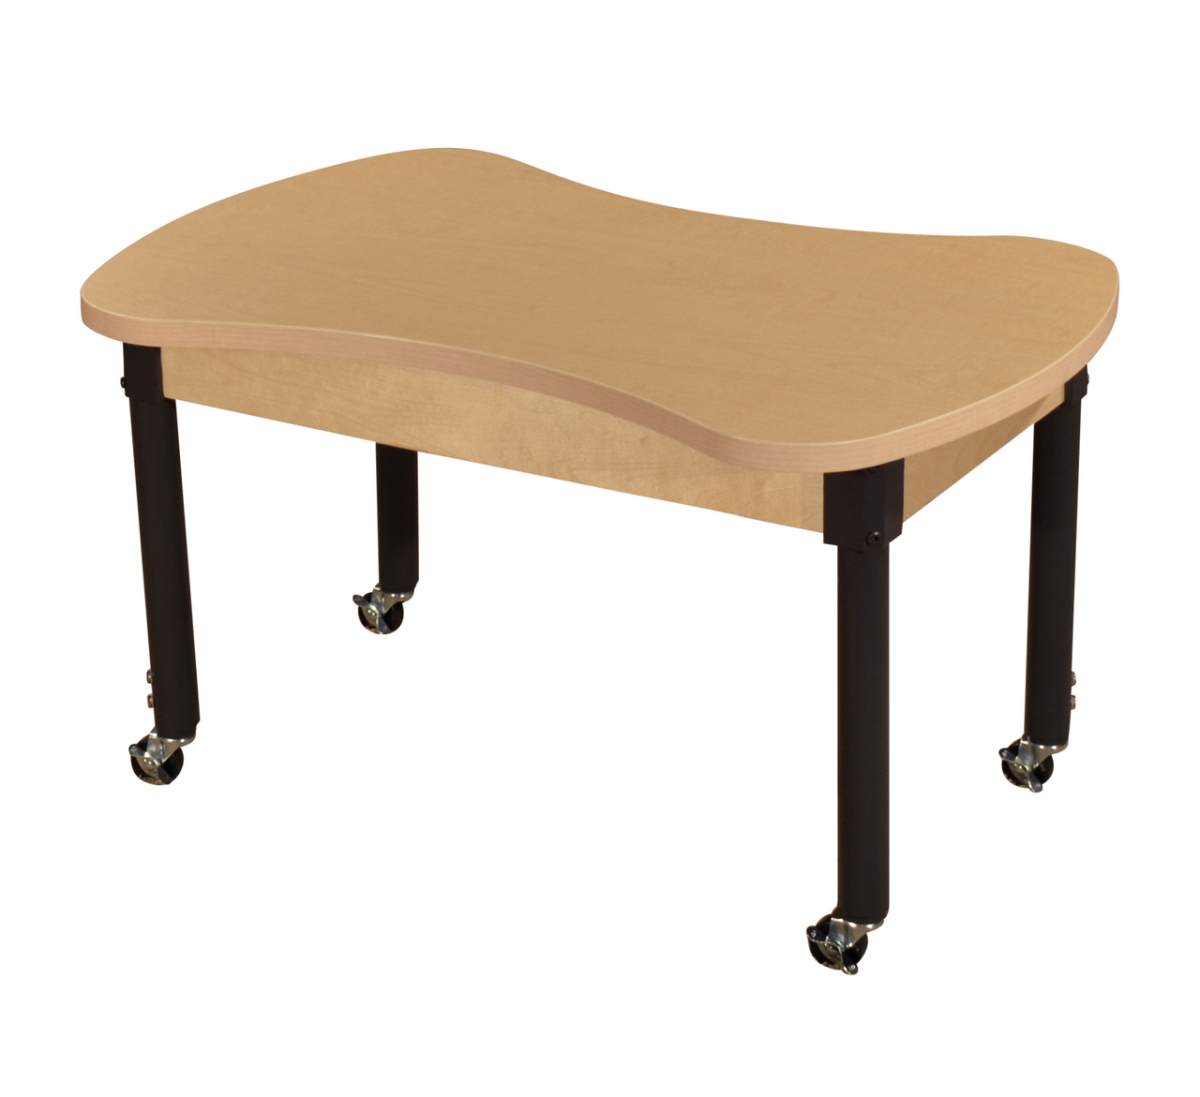 Picture of Wood Designs HPL2436CA1829C6 24 x 36 in. Mobile Synergy Junction, High Pressure Laminate Table with Adjustable Legs 20-31 in.